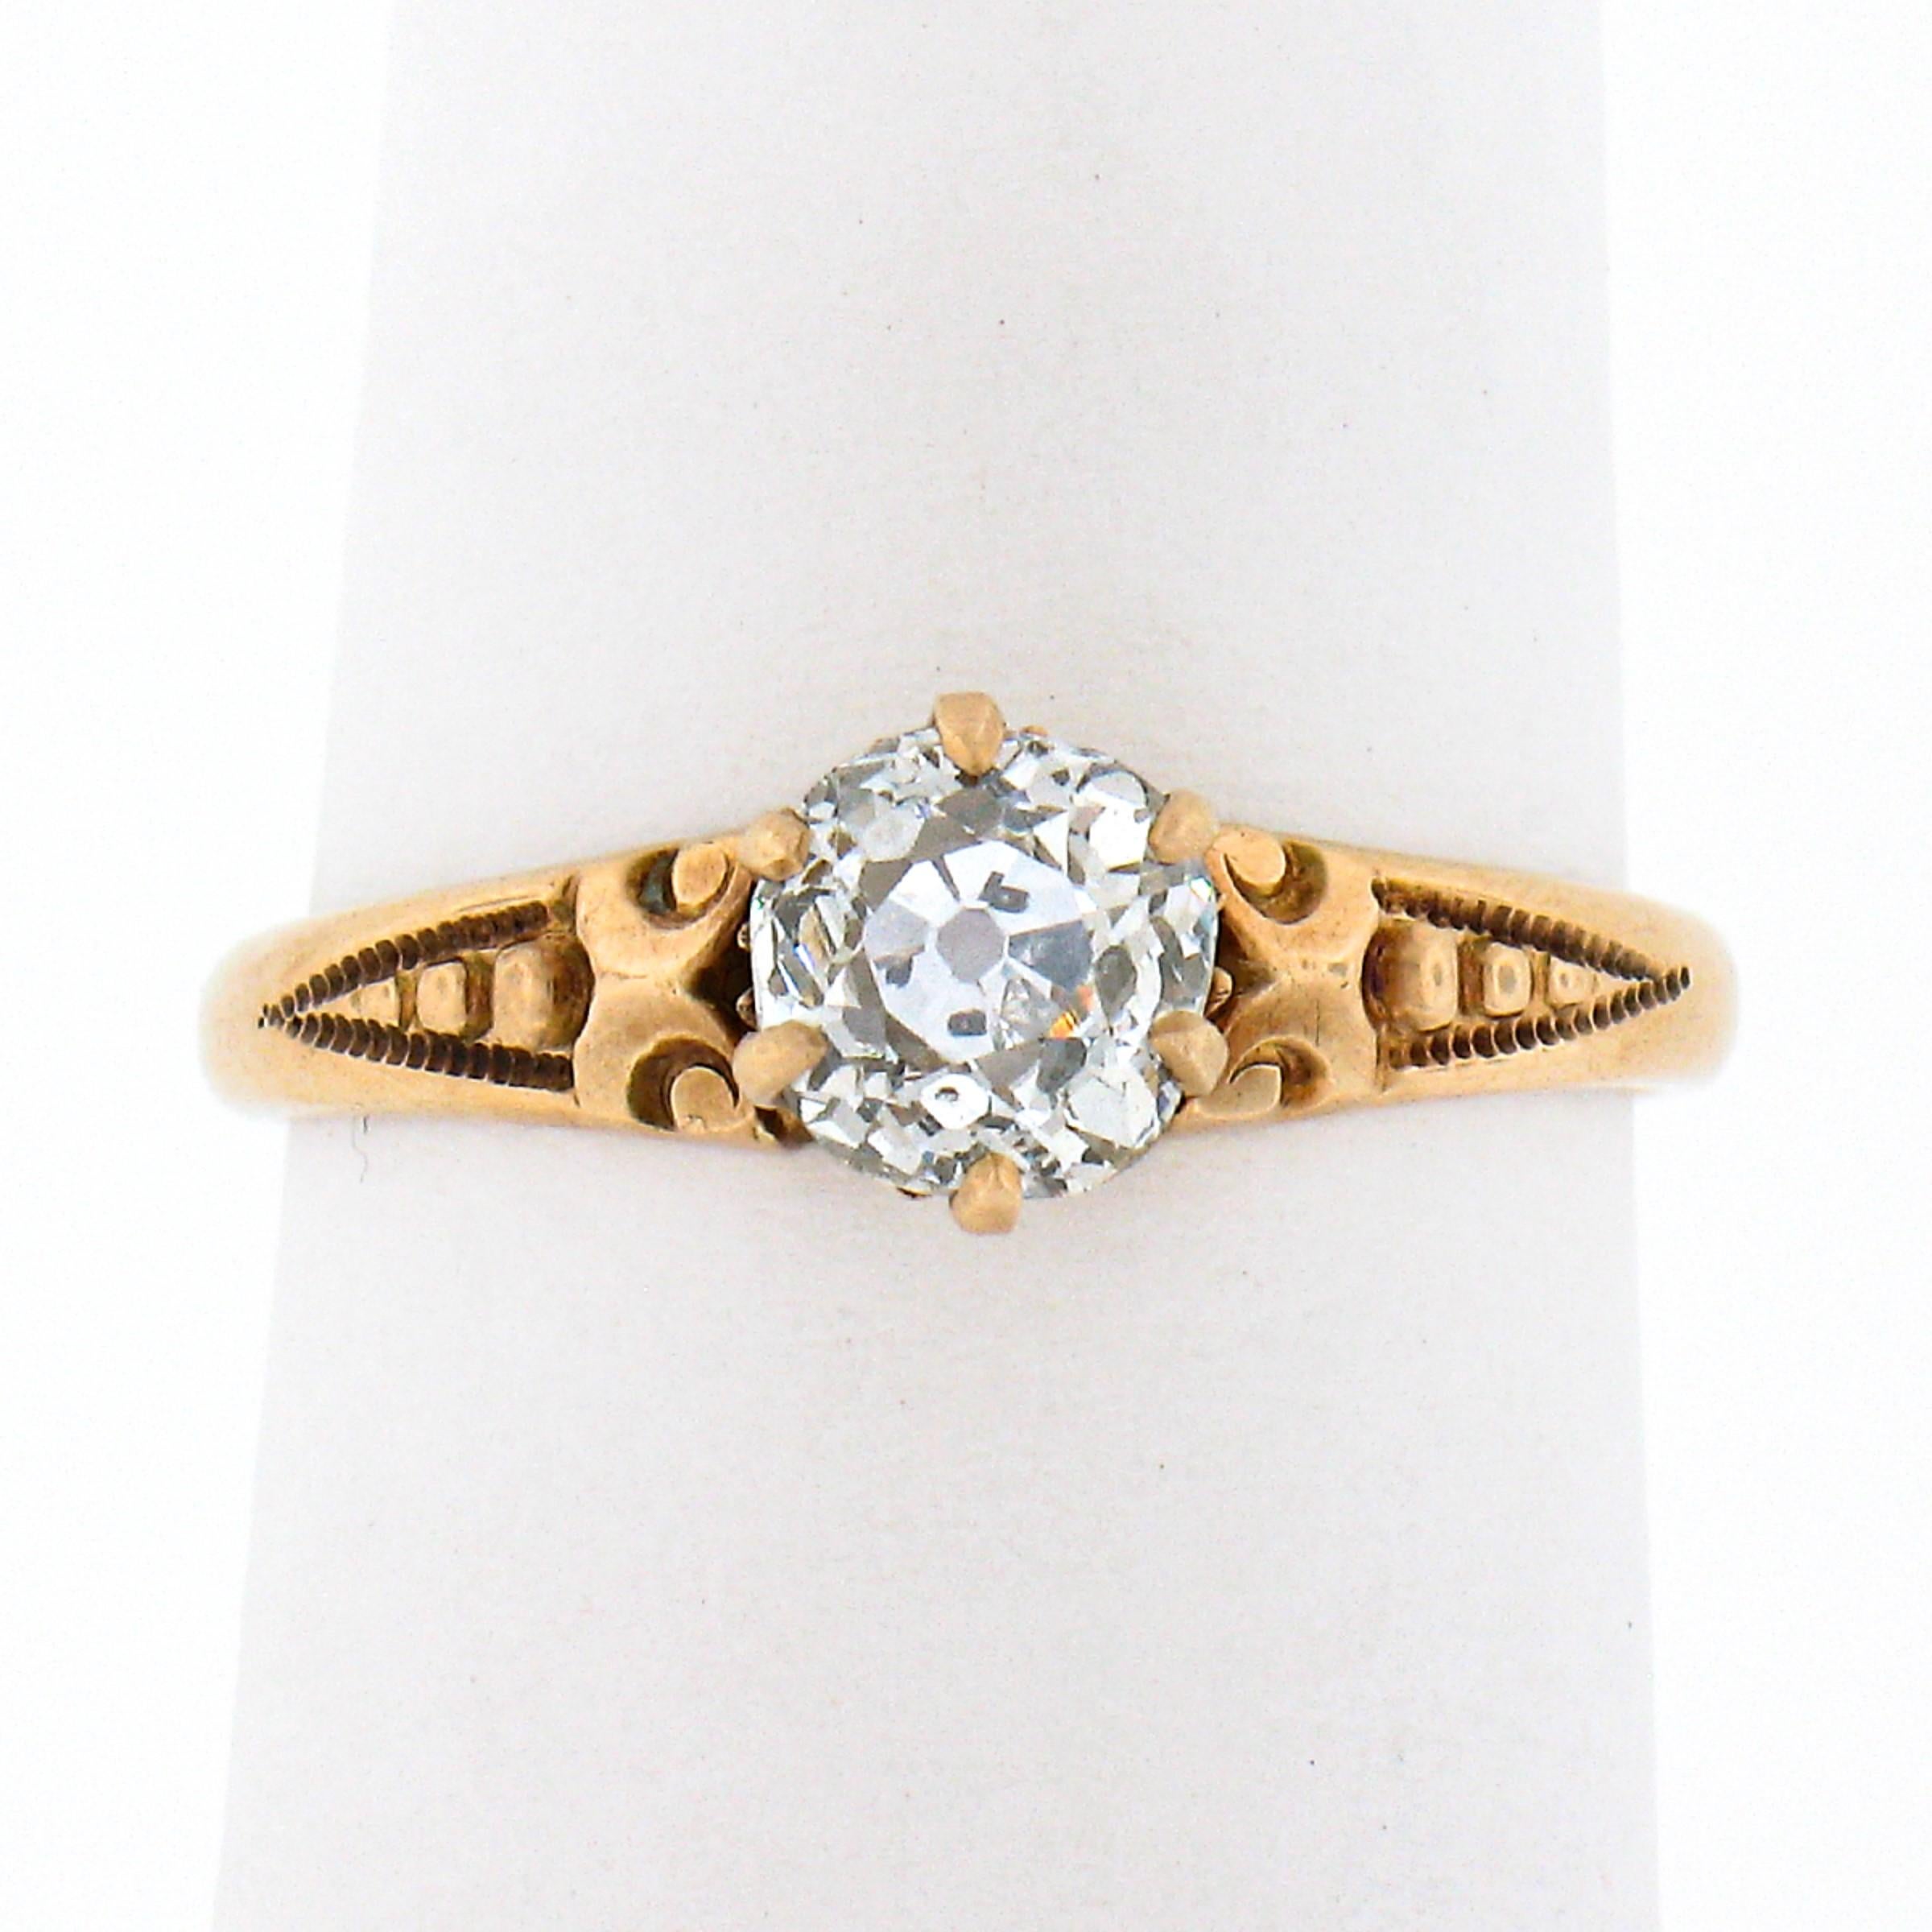 This gorgeous antique diamond engagement ring was crafted from 10k gold during the Victorian era and features a fine quality old mine cut diamond solitaire neatly prong set at its center. This stunning diamond has been certified by GIA at exactly